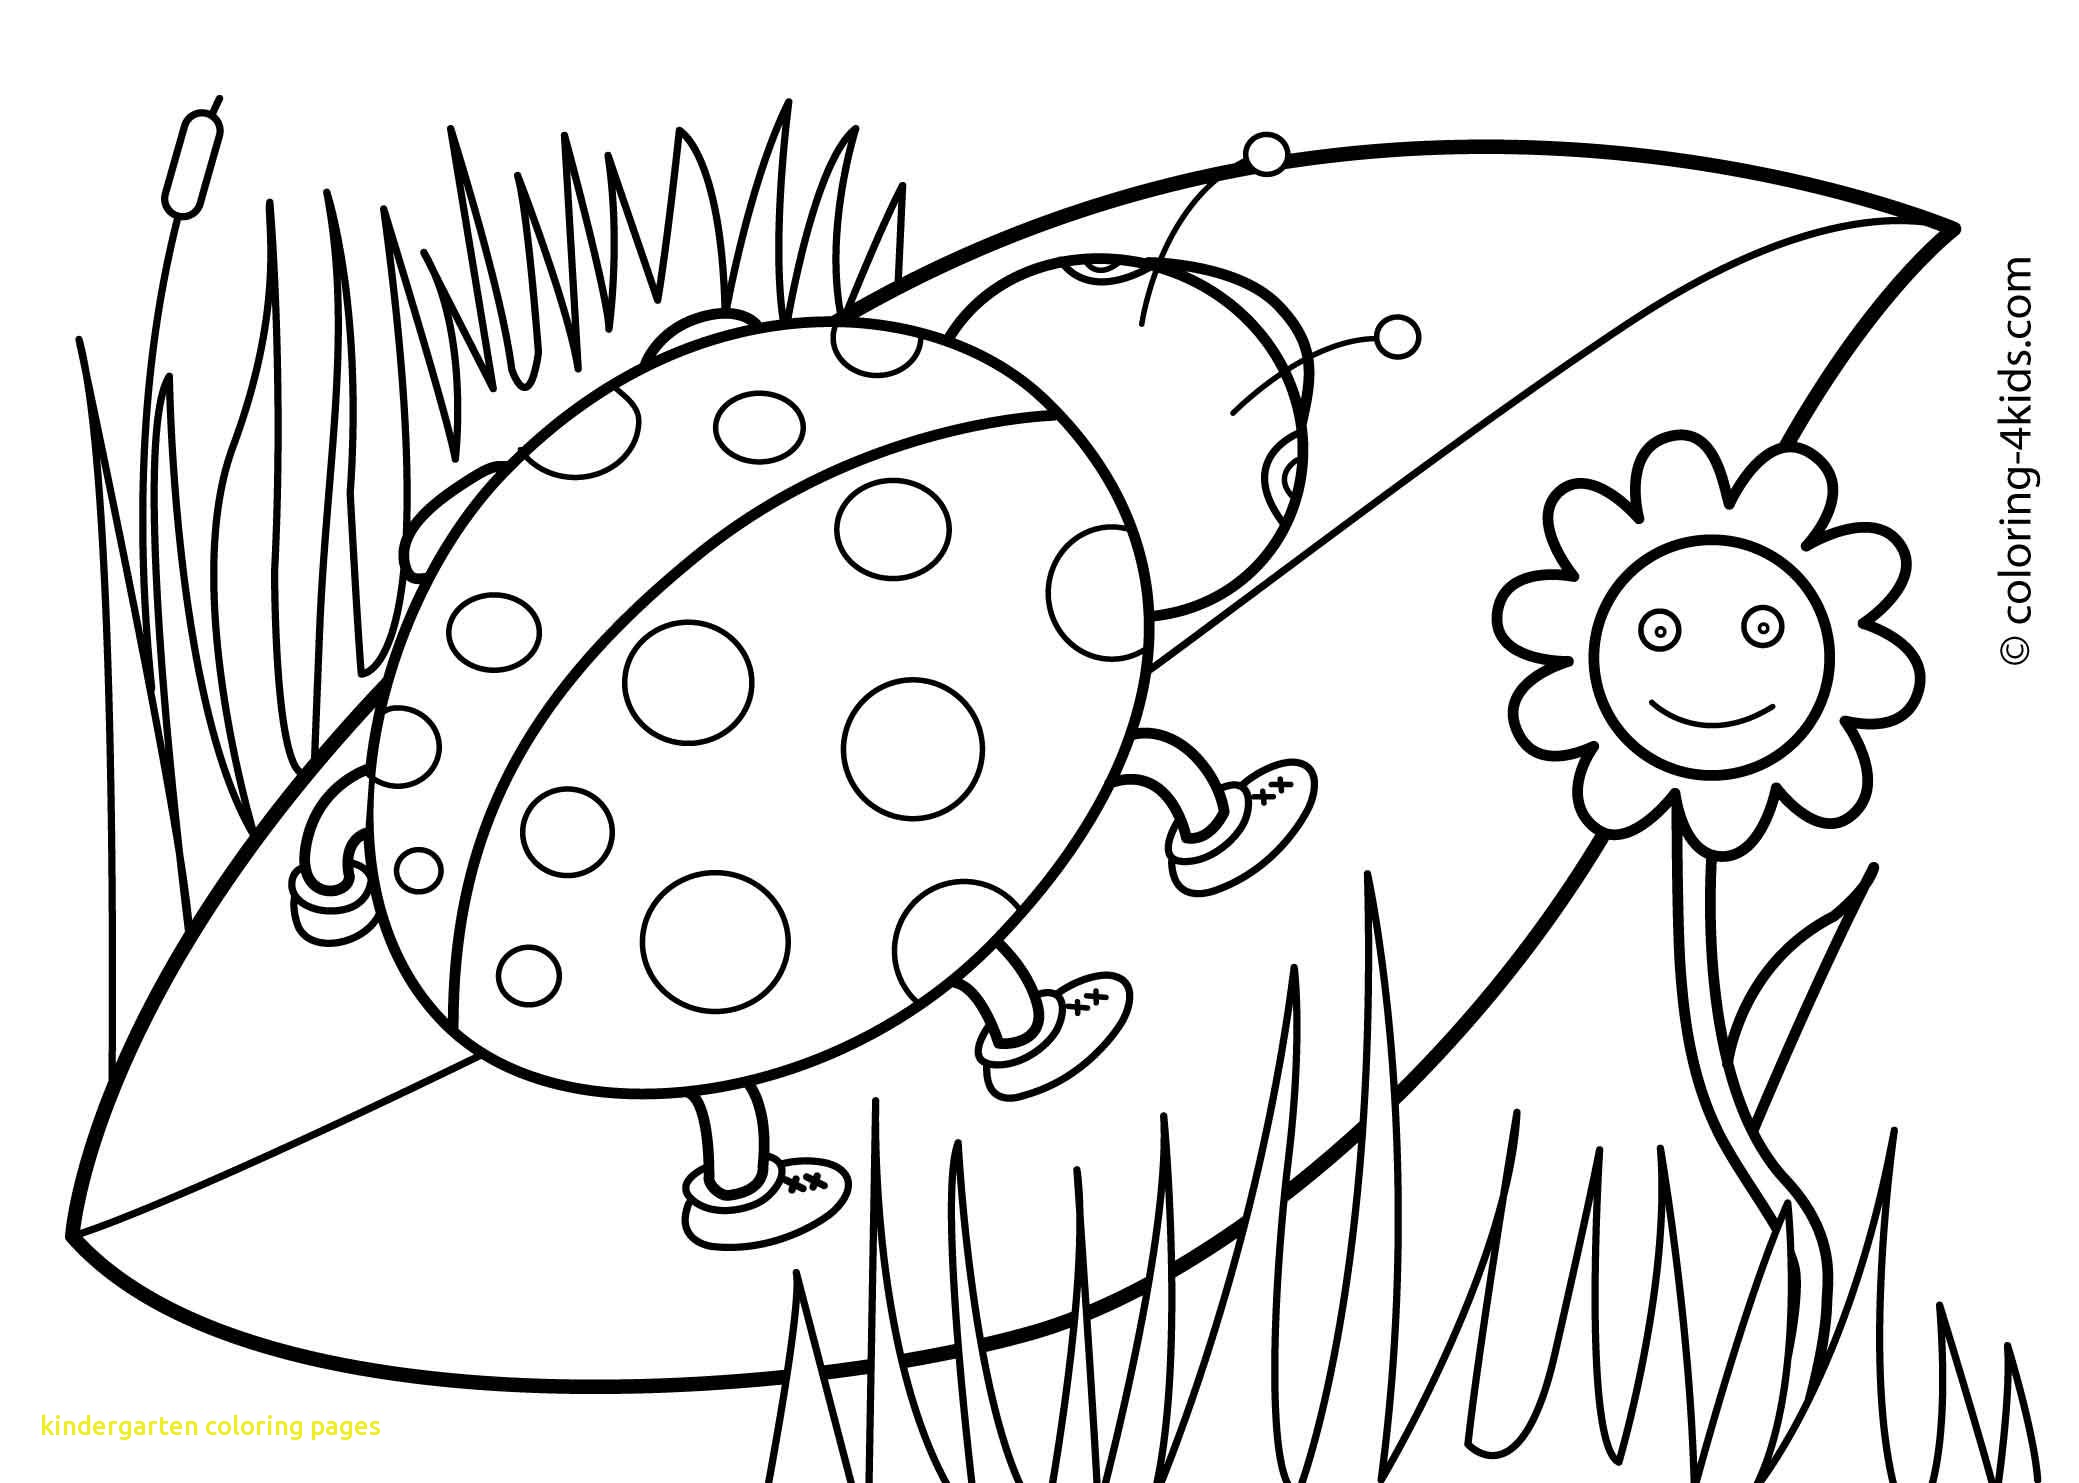 Free Printable Kindergarten Coloring Pages at GetColorings com Free